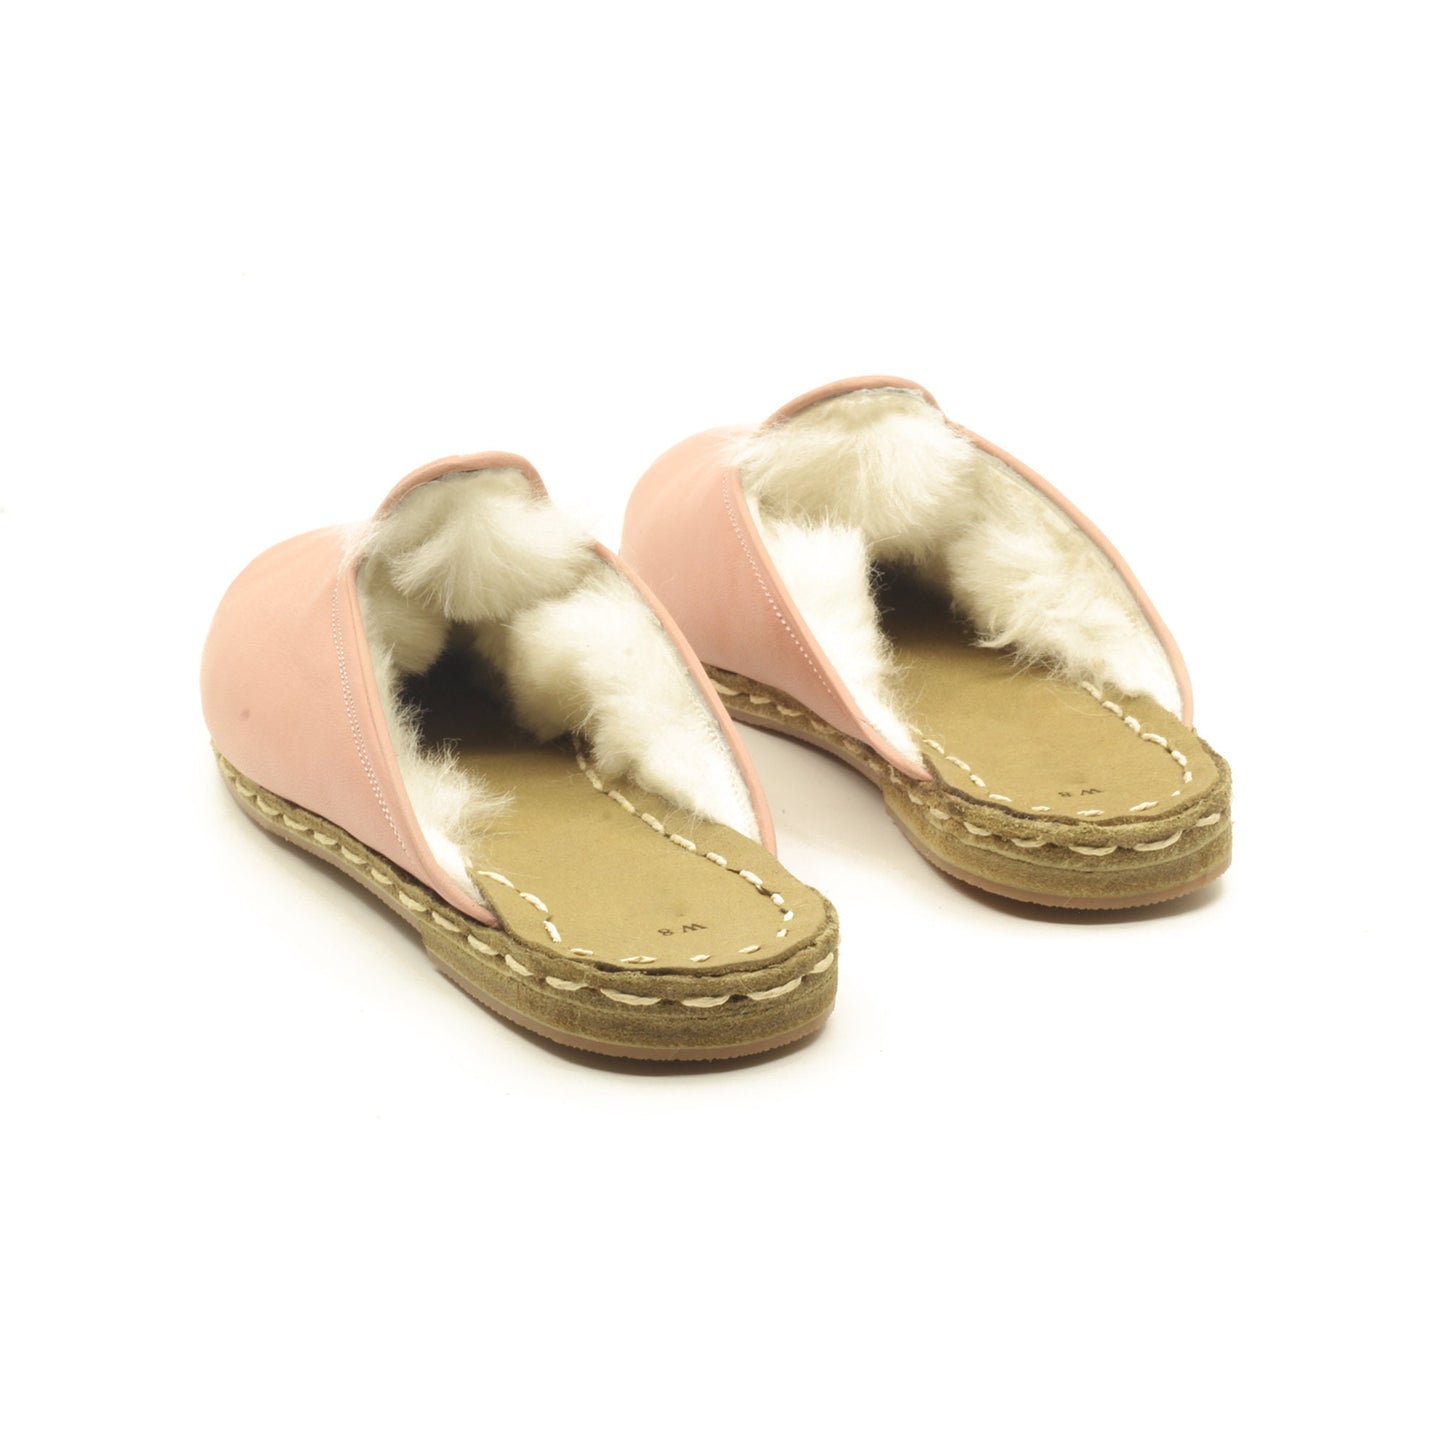 Winter Slippers  - Sheepskin slippers  - Close Toed Slippers - Light Pink Leather – Rubber Sole - For Women